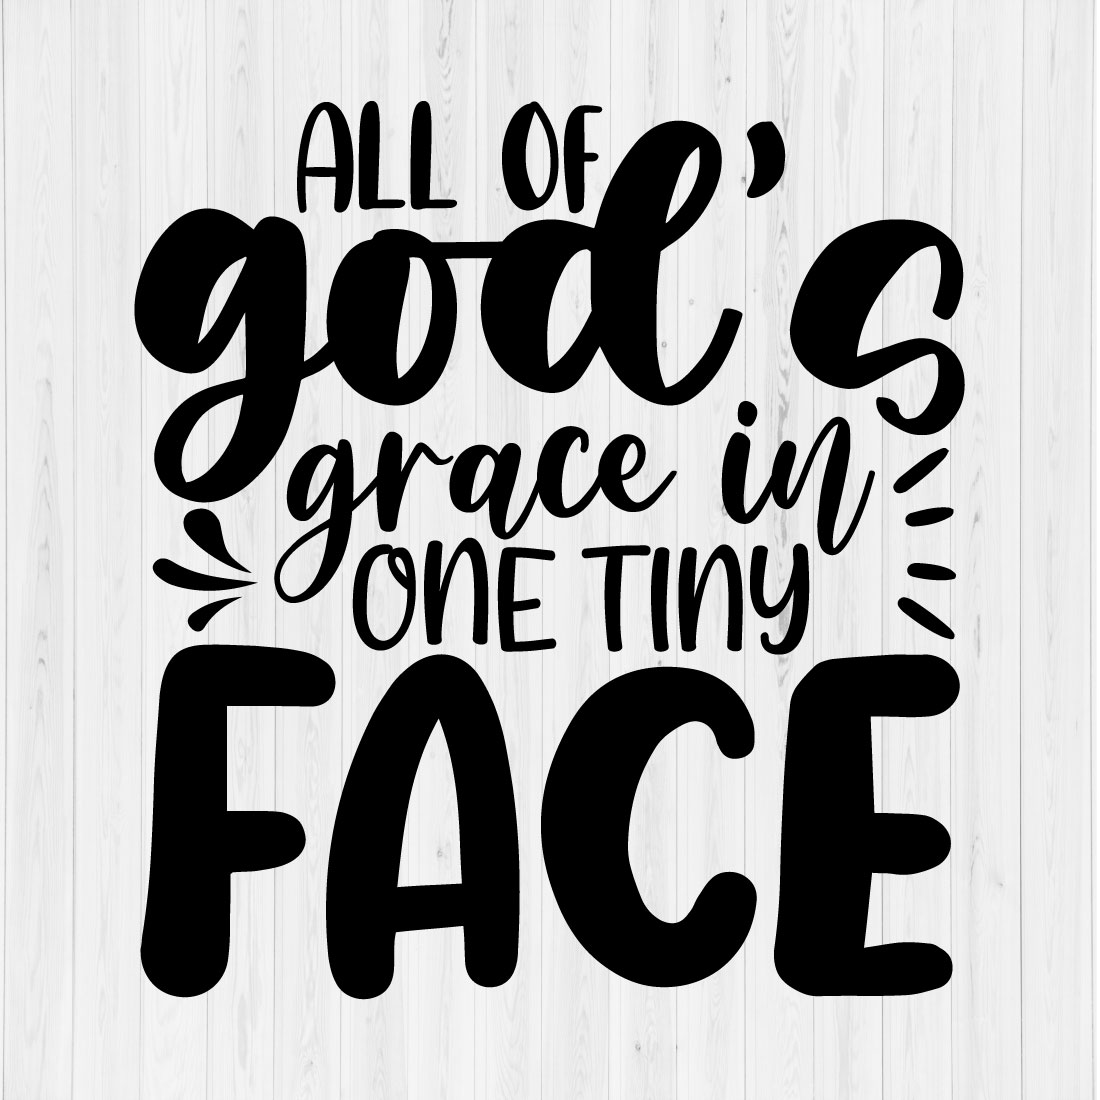 All of god s grace in one tiny face preview image.